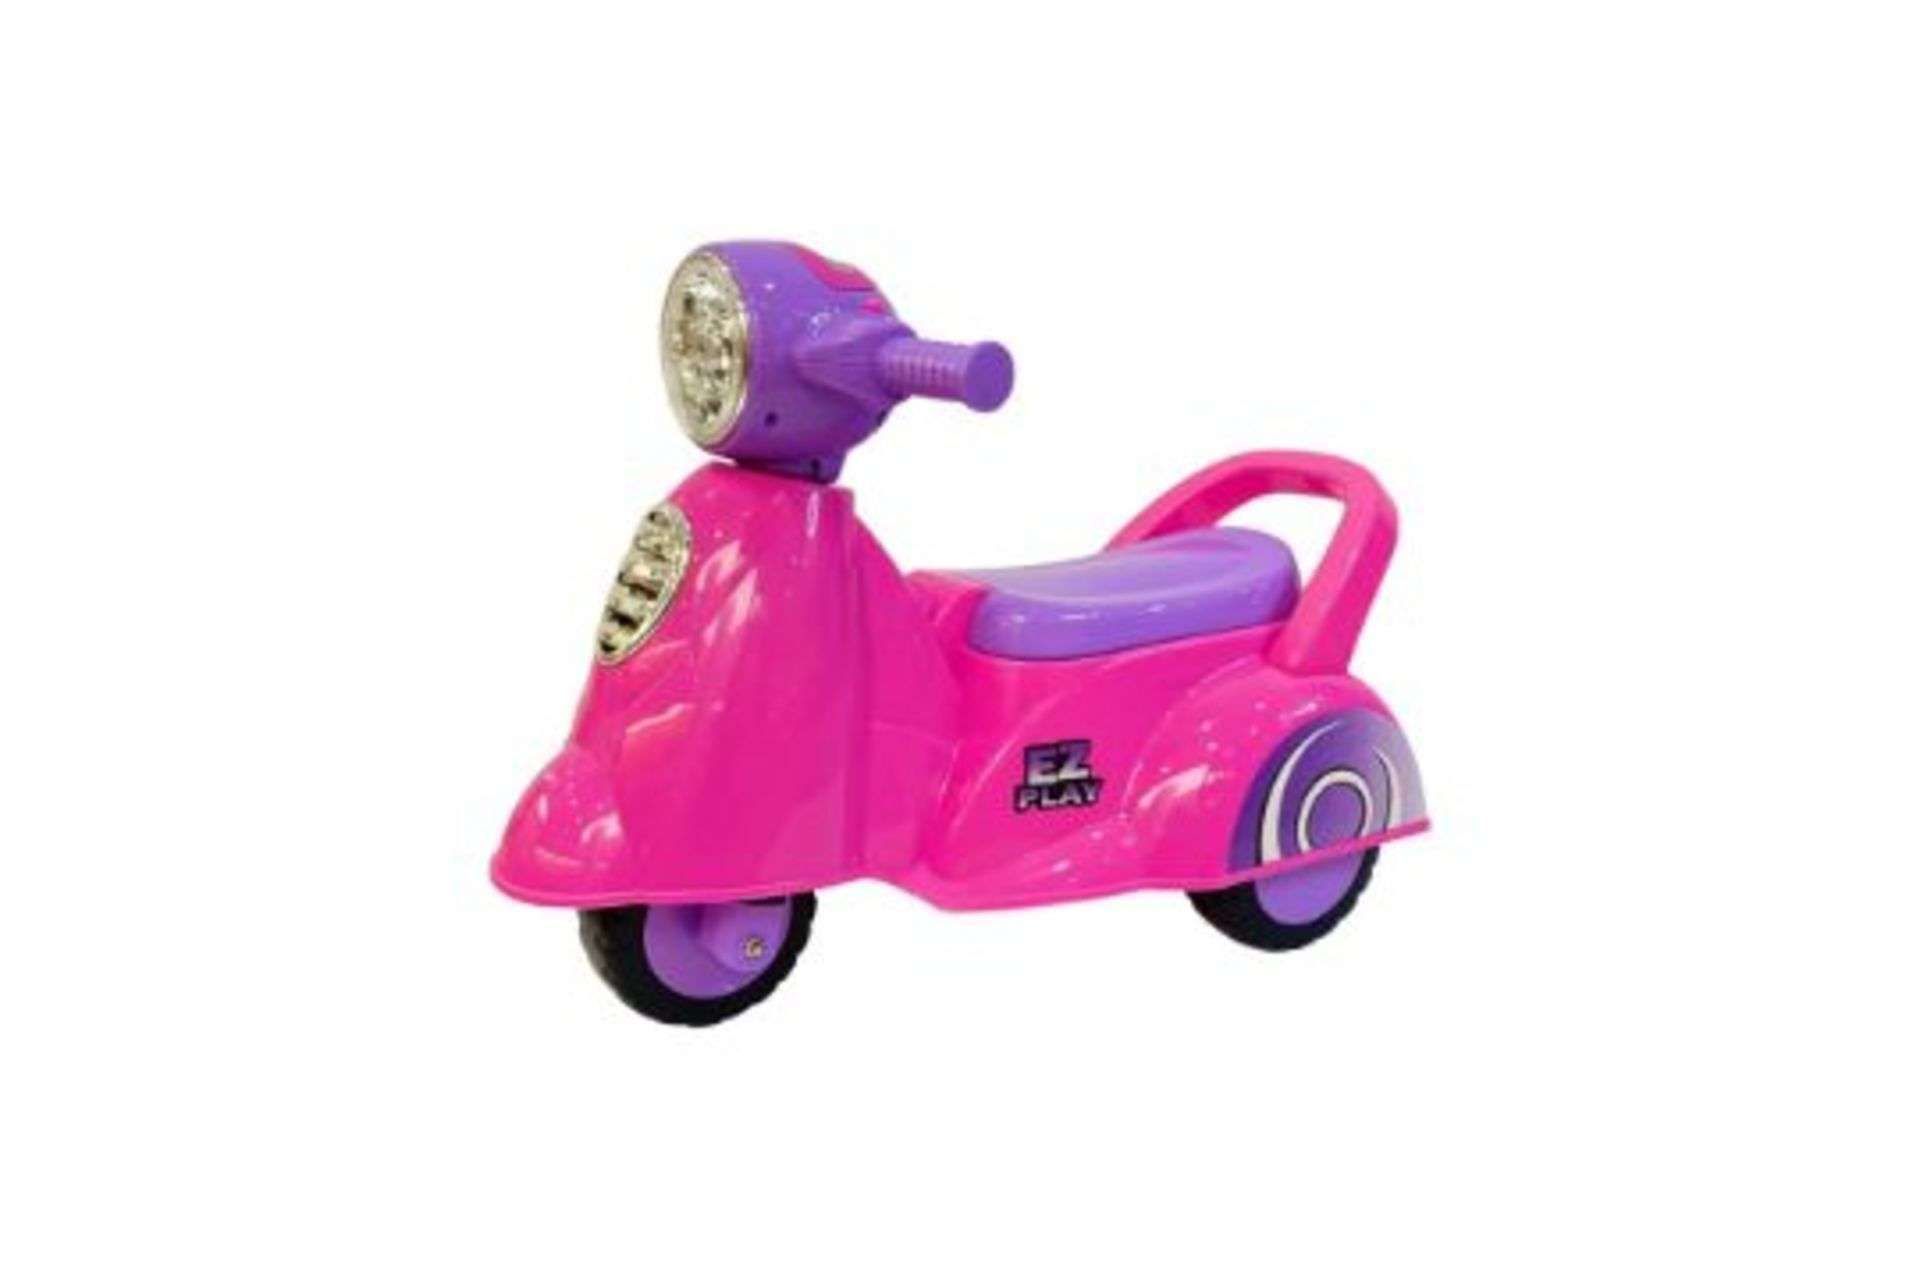 2 X BRAND NEW RICCO PINK SCOOTER RIDE ON TOYS (R605 PINK) R7-5